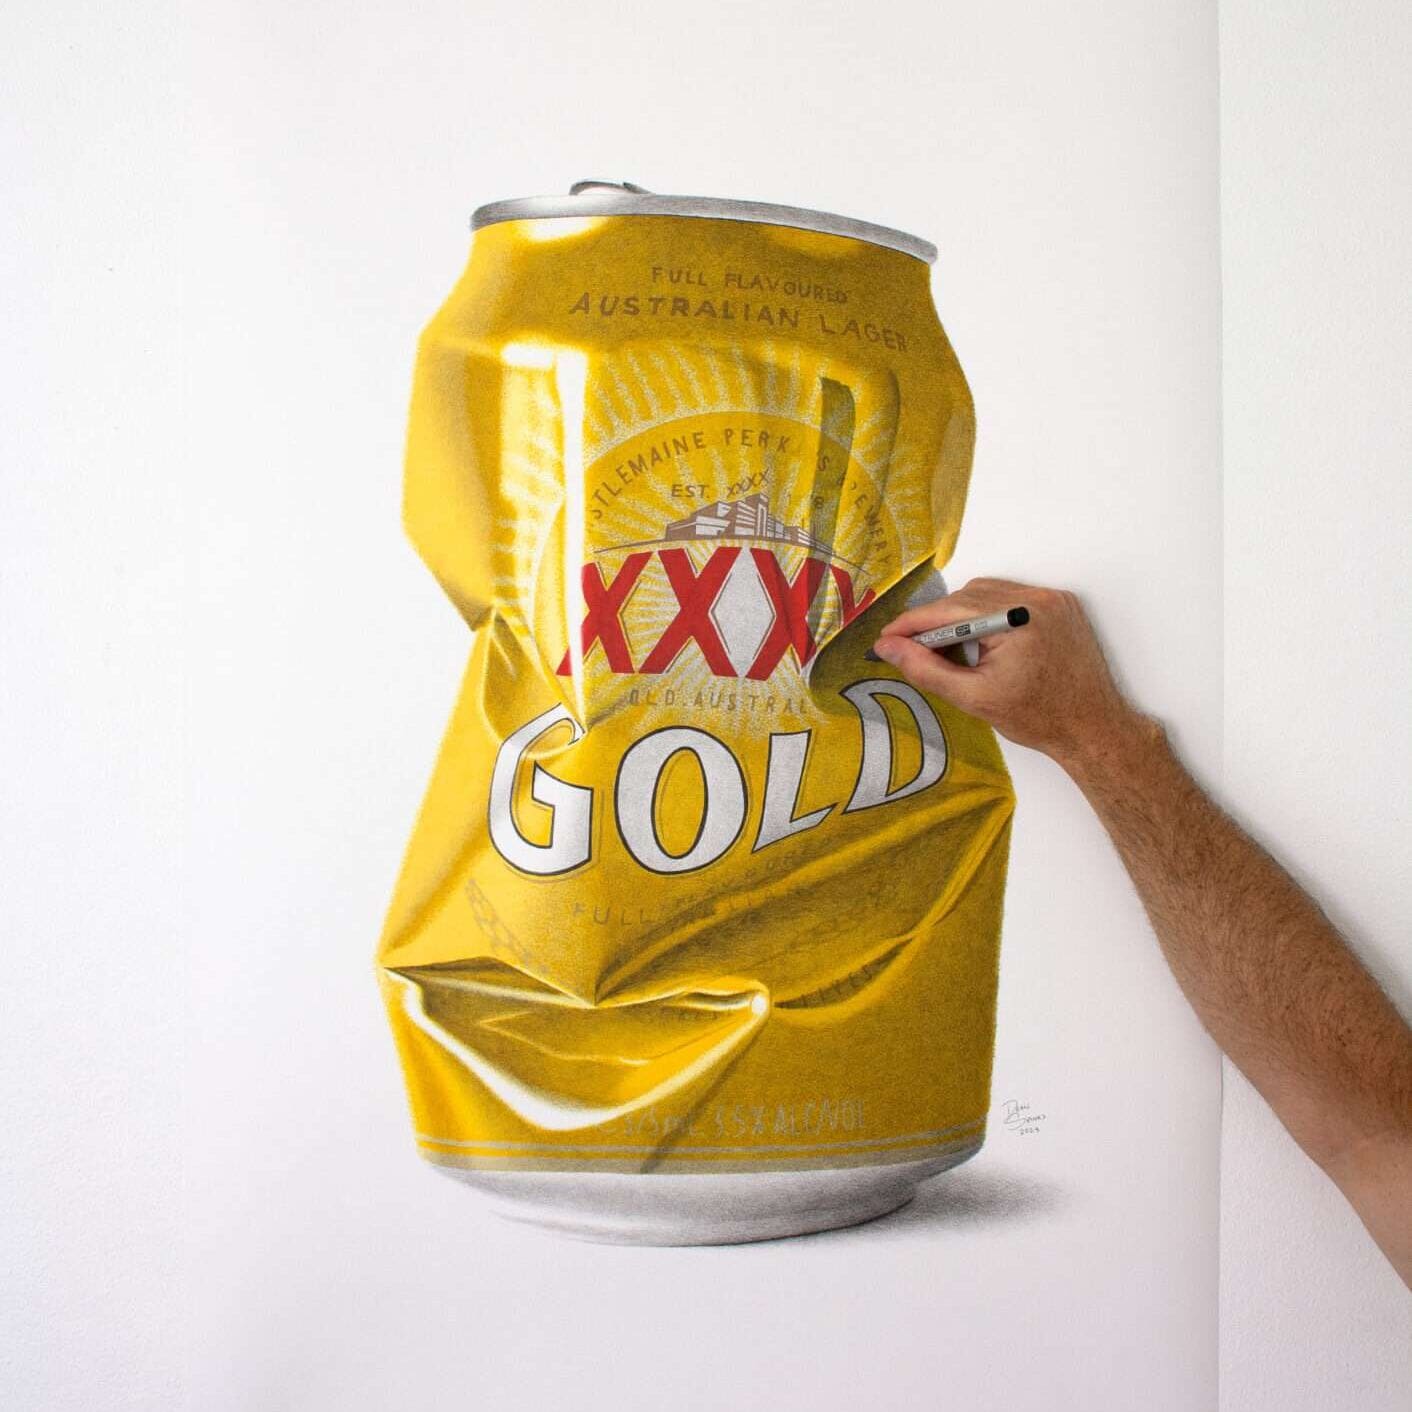 Photorealistic XXXX Gold crushed beer can artwork hand drawn by Dean Spinks